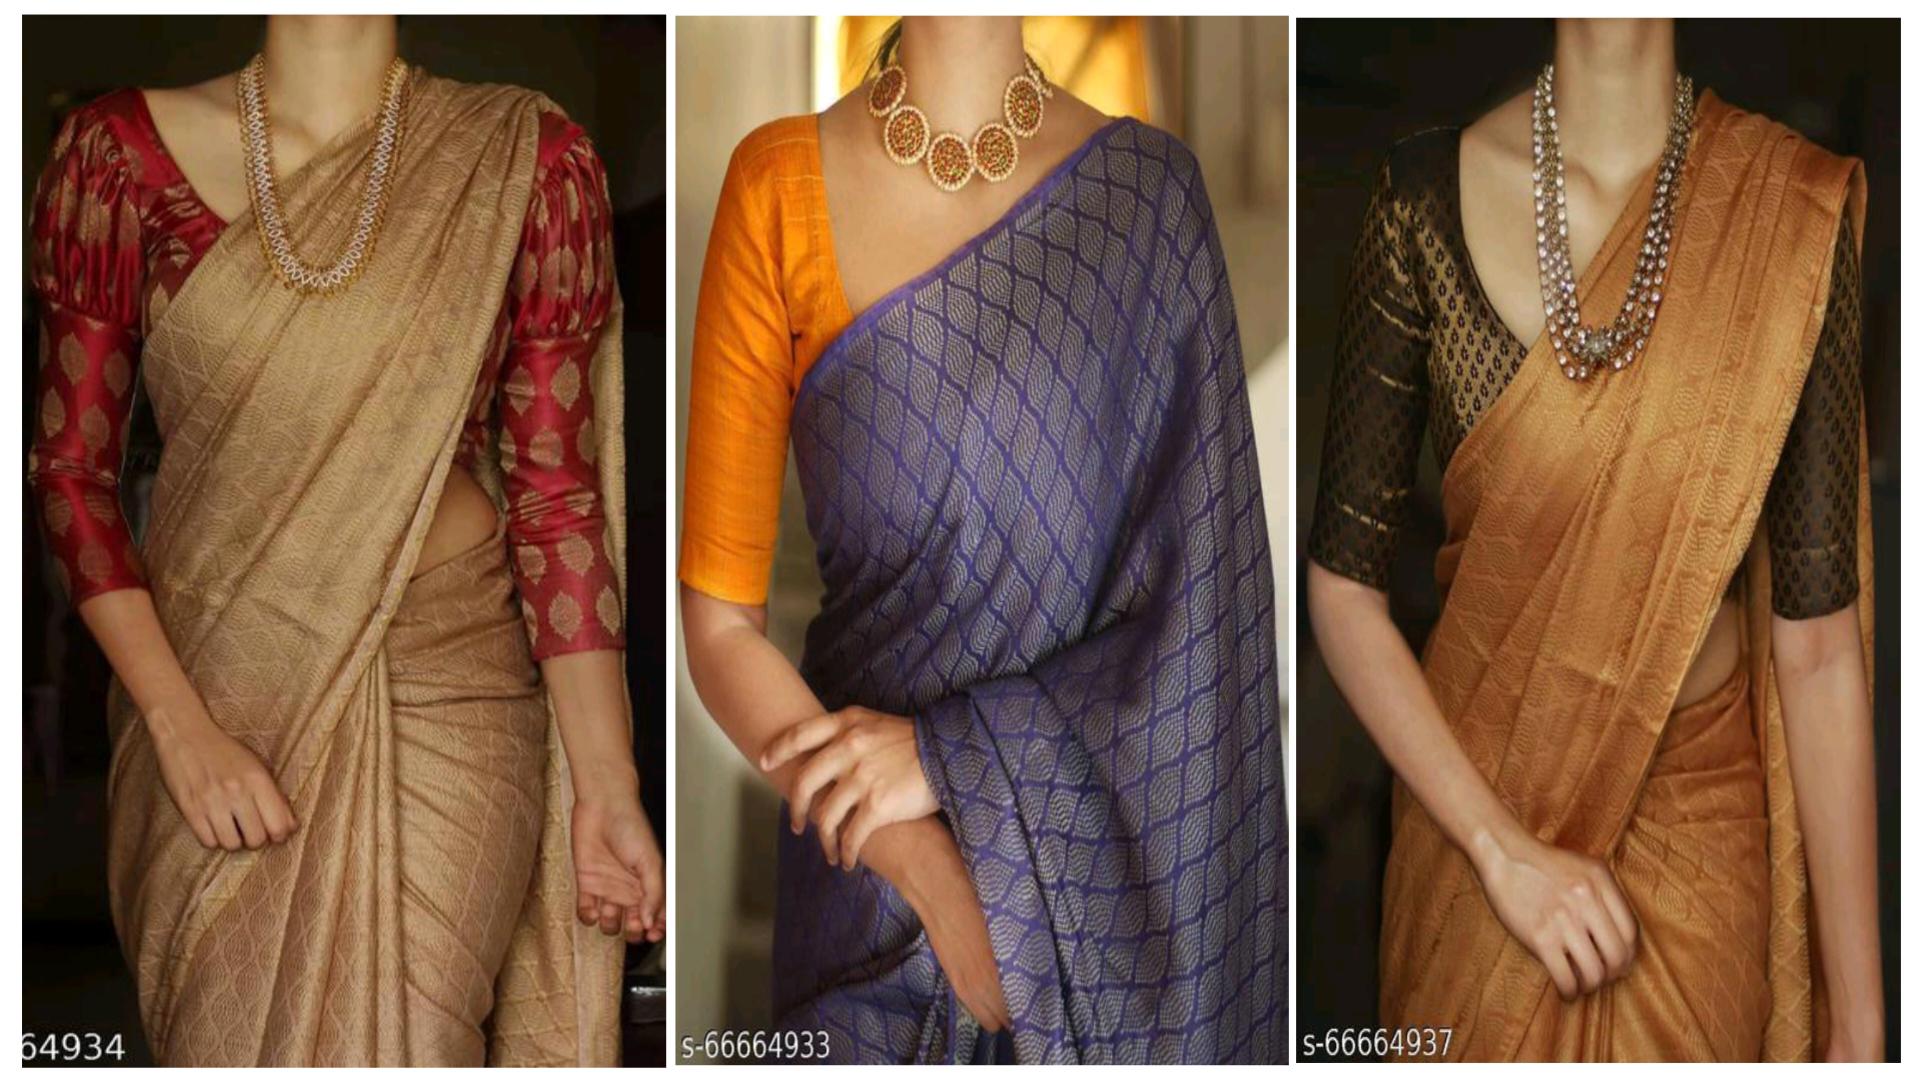 New Silk Sarees Designs For Women And Girls - Girls Fashion Ideas